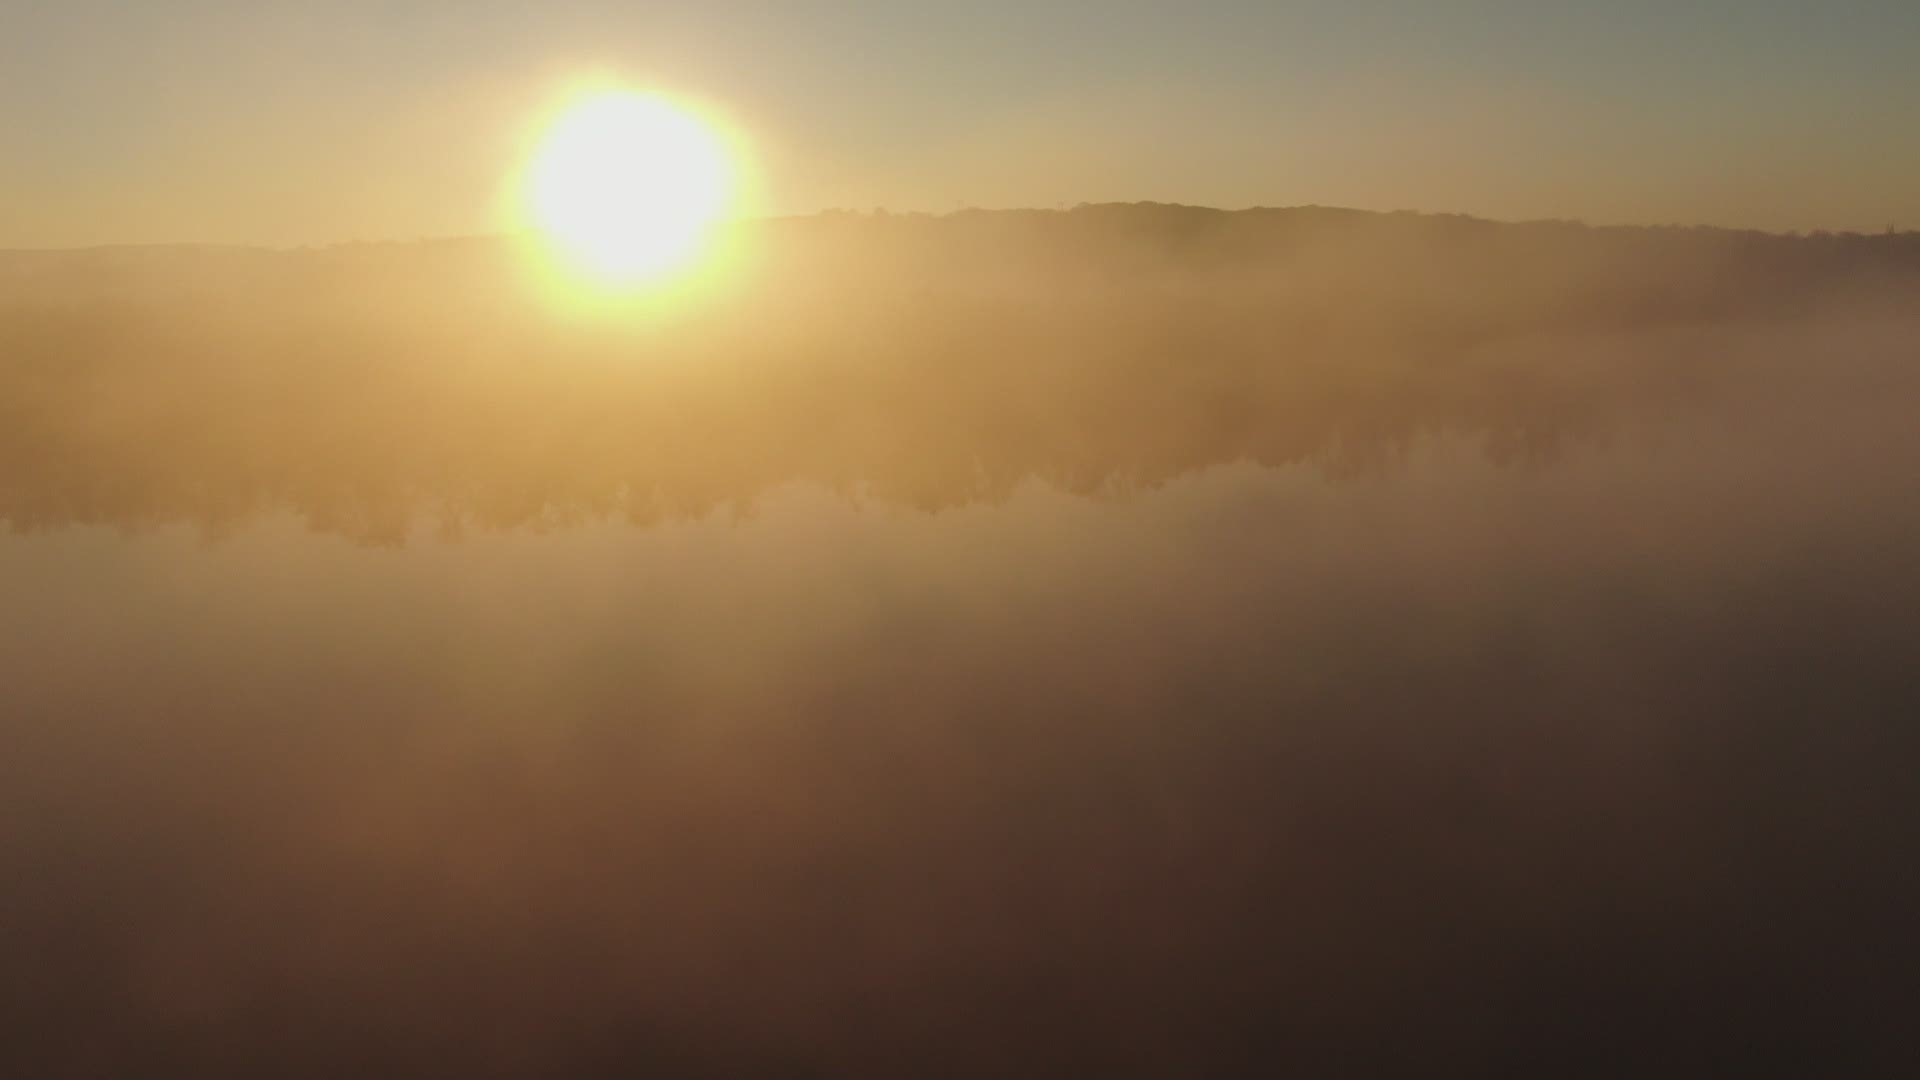 SKY61 flies over the Connecticut River in Cromwell capturing the early morning river fog